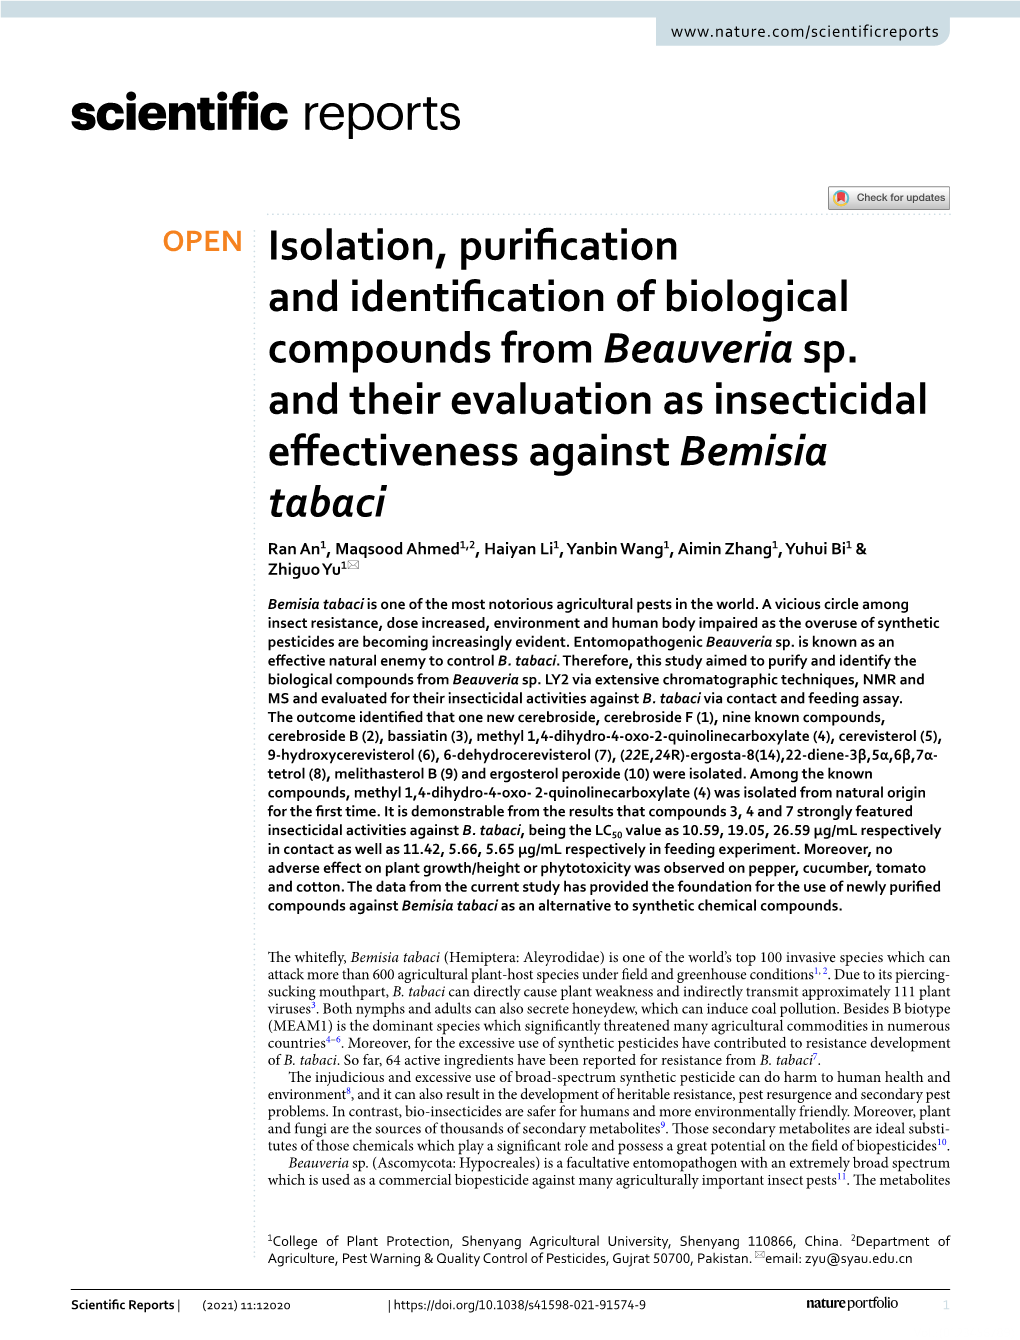 Isolation, Purification and Identification of Biological Compounds from Beauveria Sp. and Their Evaluation As Insecticidal Effec